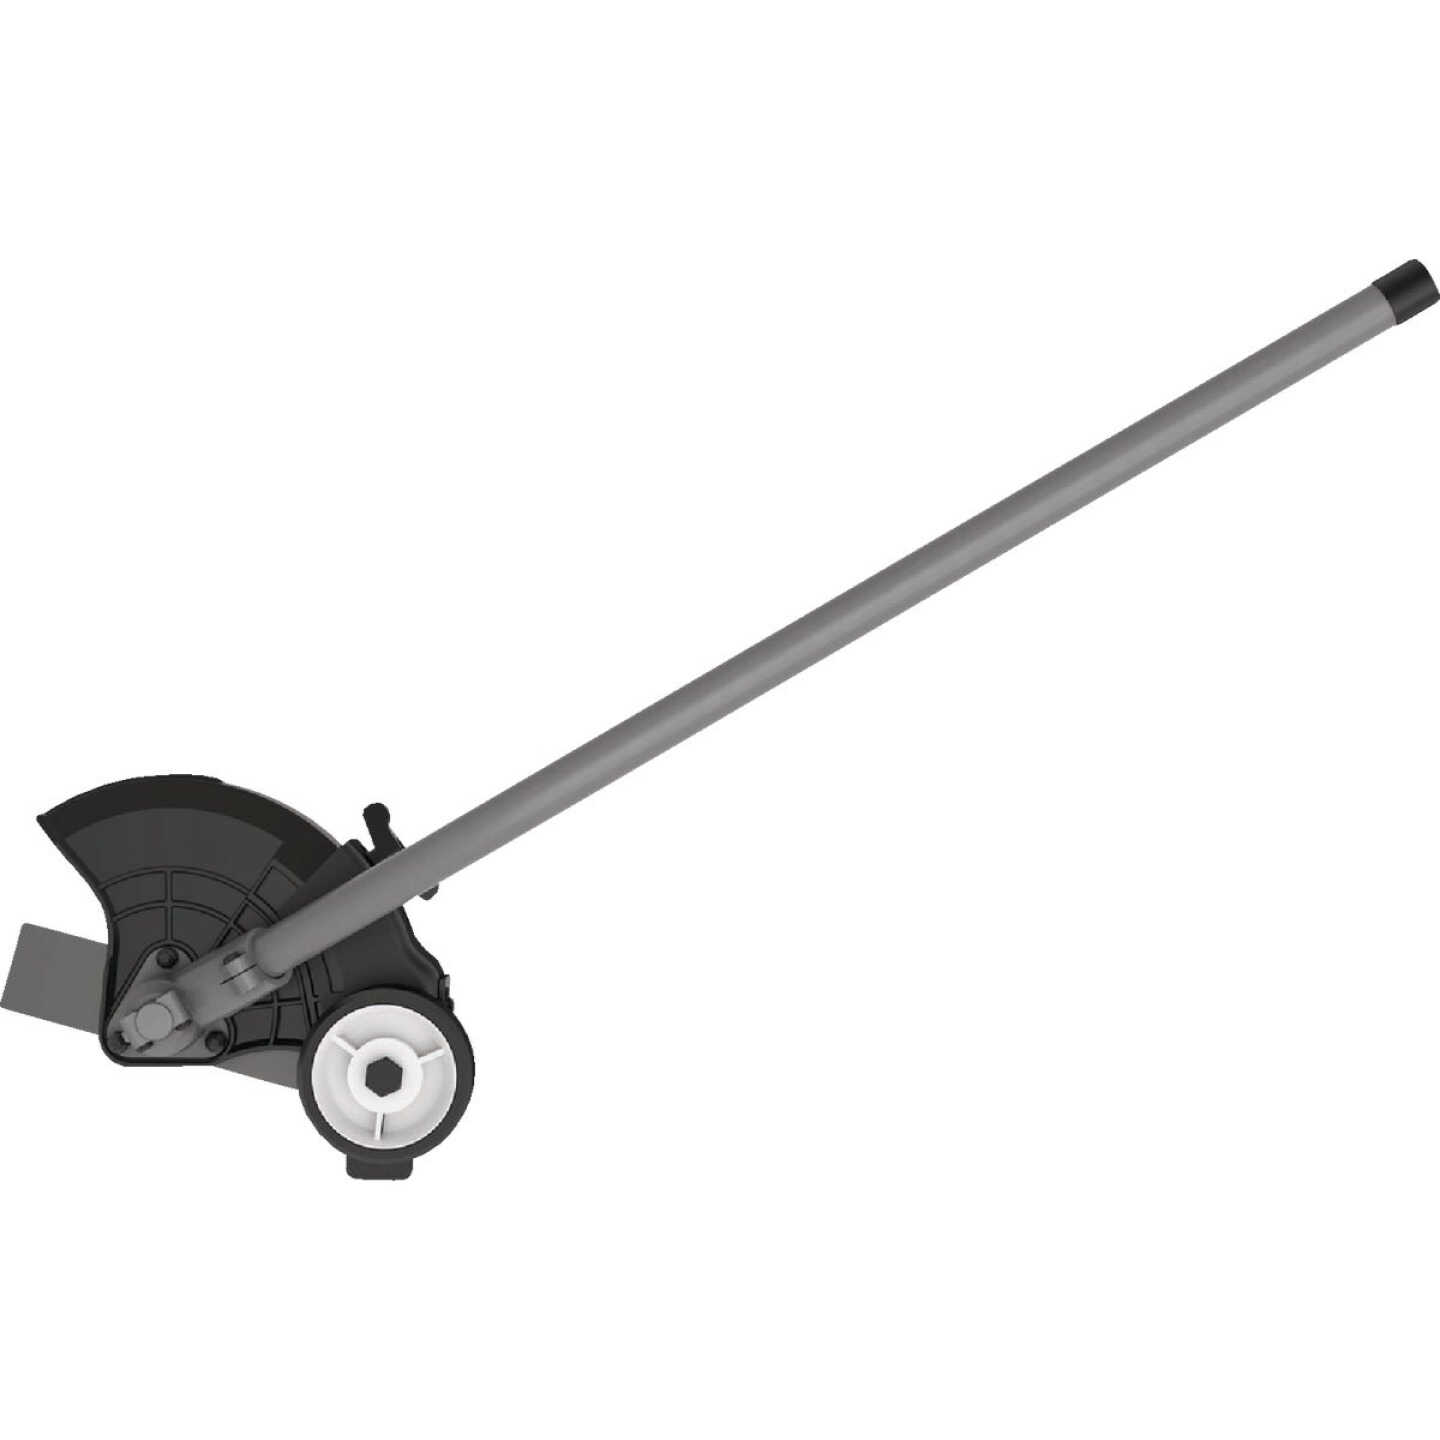 Black Max 2-Cycle Gas 25cc Curved Shaft Attachment Capable String Trimmer  with Edger Attachment 